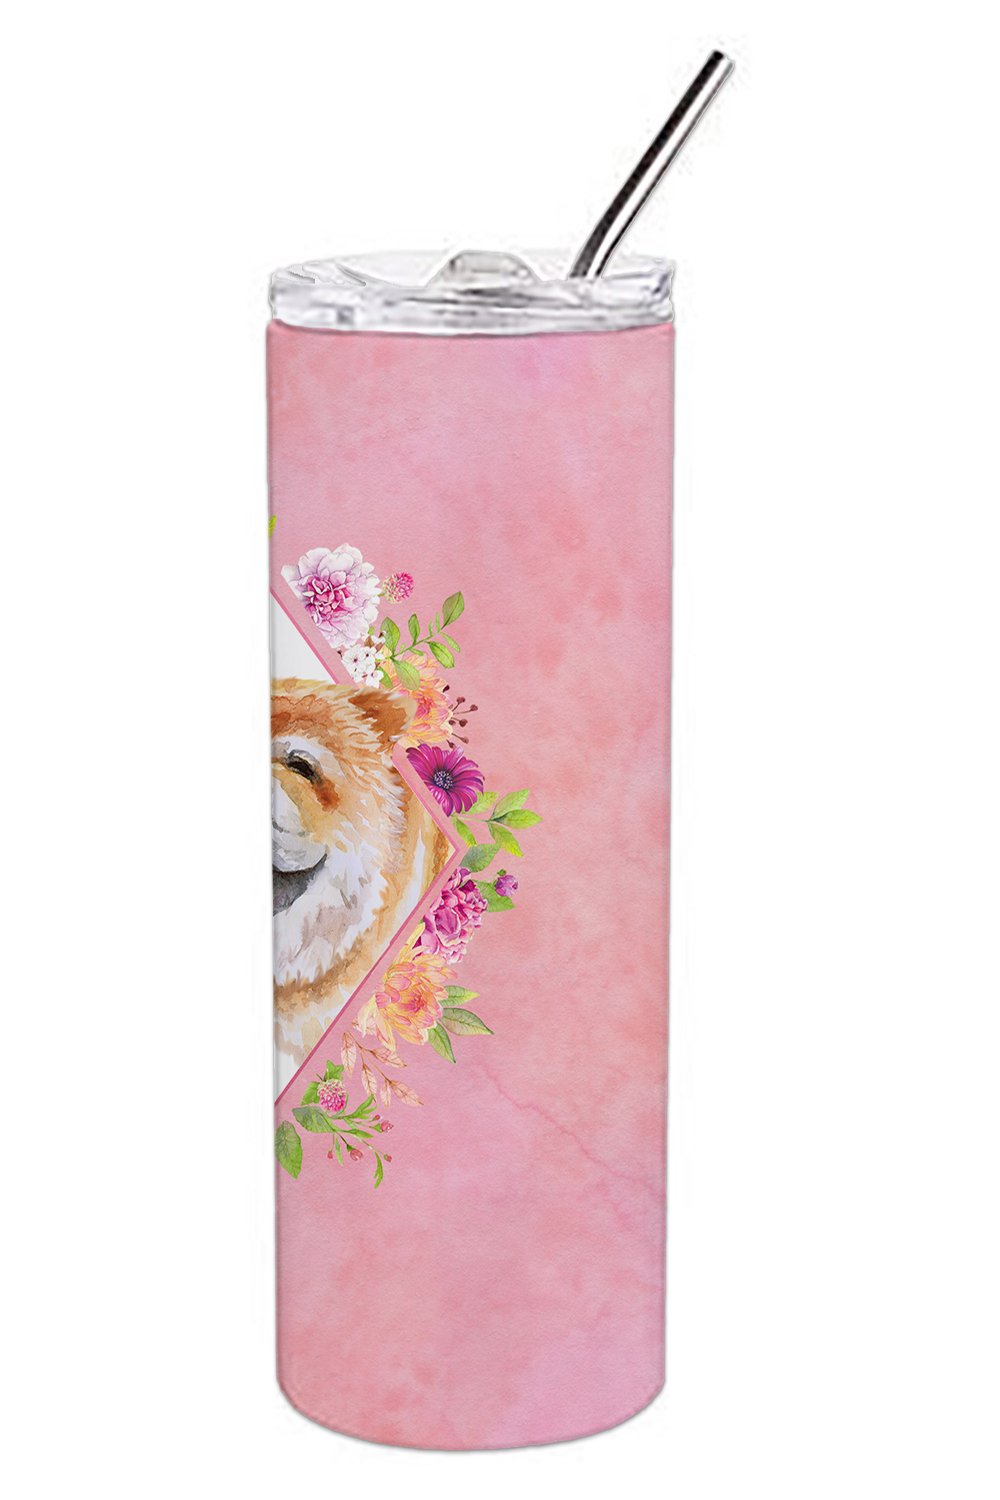 Chow Chow #2 Pink Flowers Double Walled Stainless Steel 20 oz Skinny Tumbler CK4132TBL20 by Caroline's Treasures